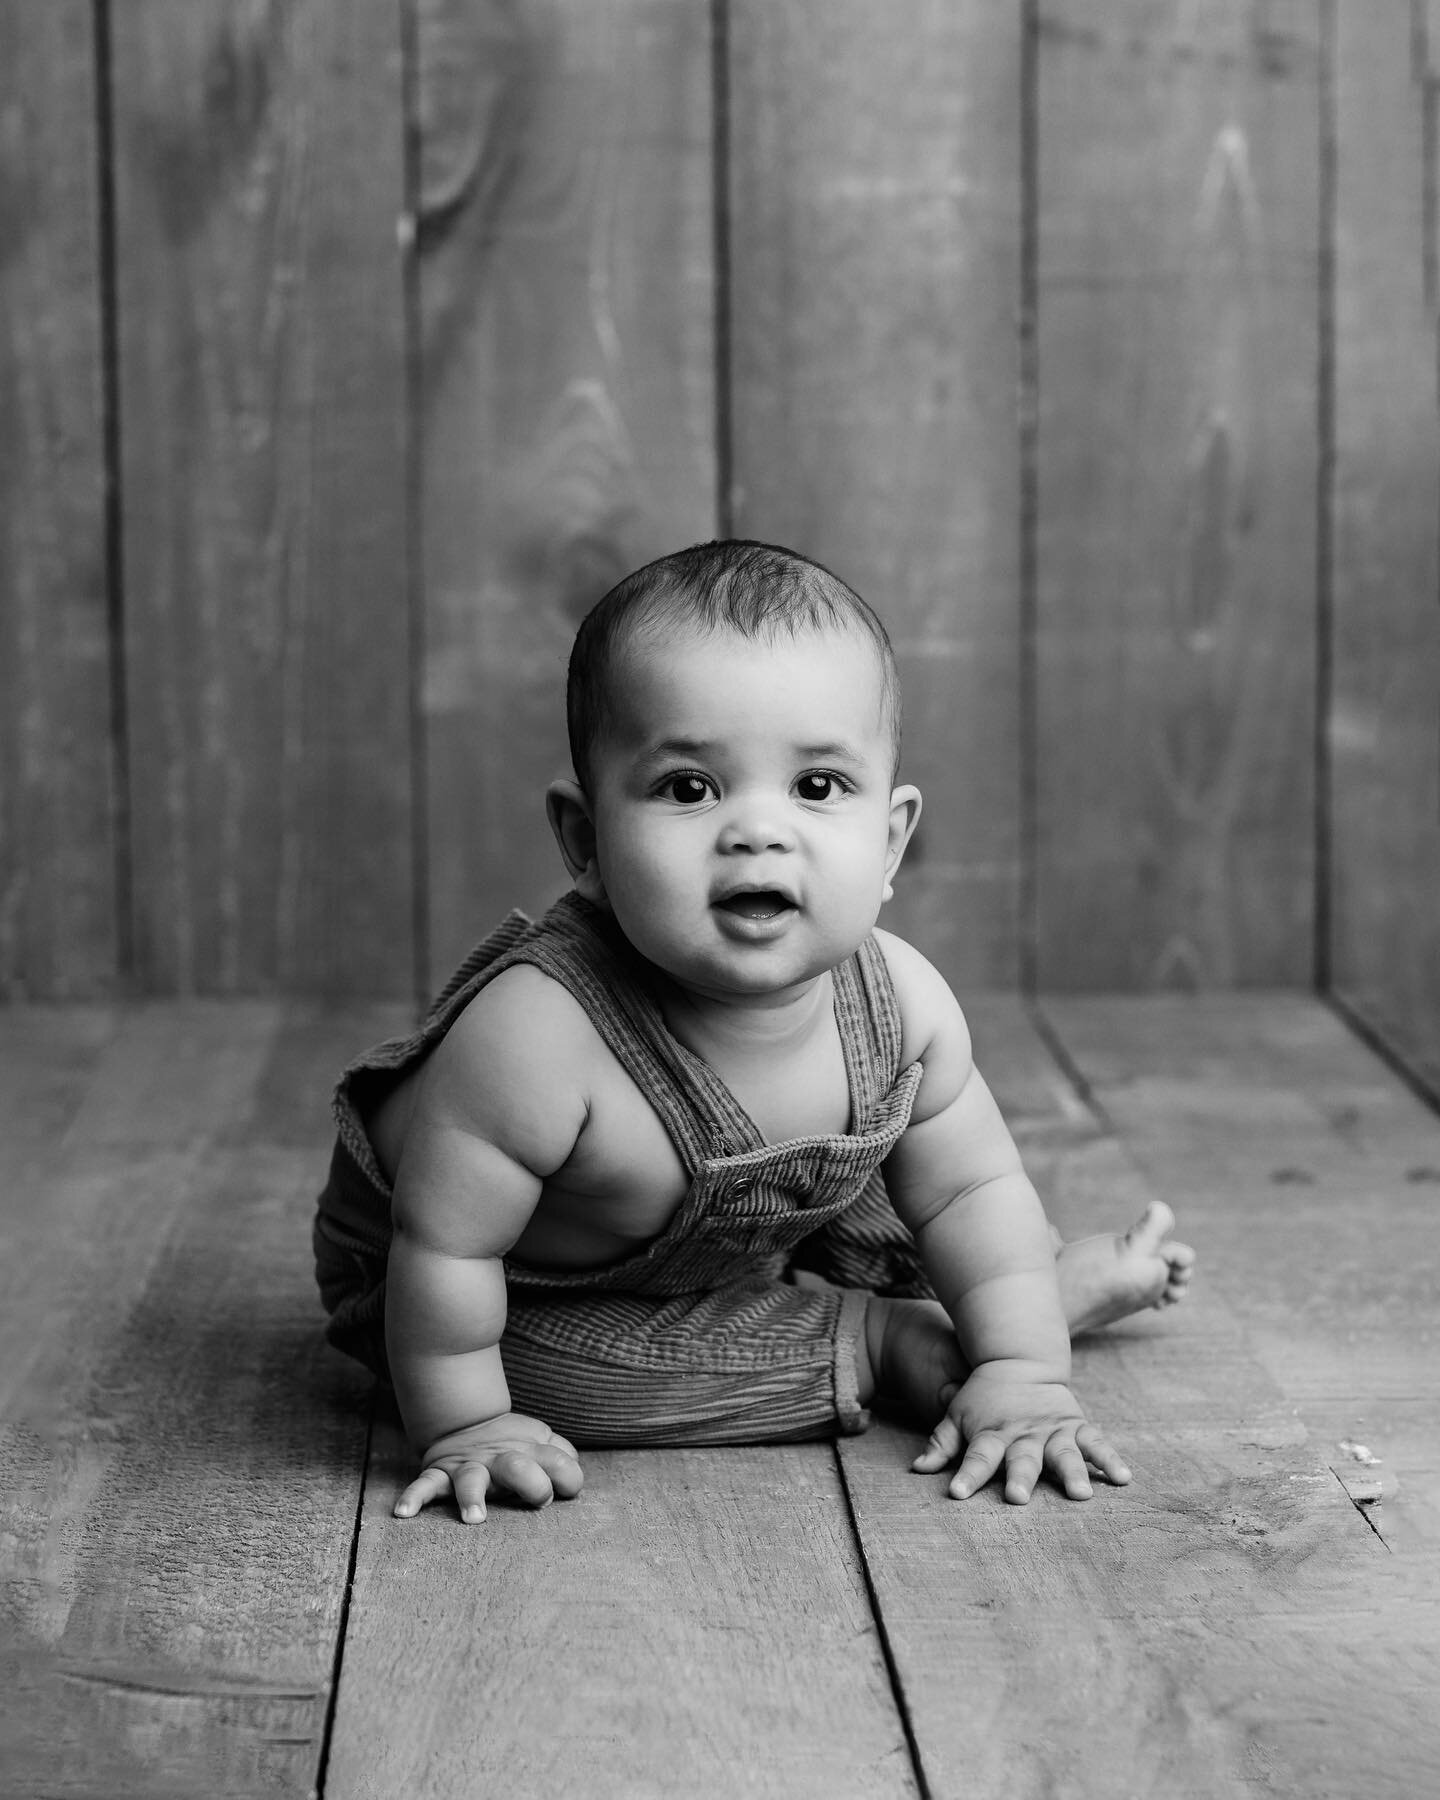 Nothing quite as cute as baby rolls in overalls! 🧸

We photographed this little guy at 7 months, right when he was sitting up (and leaning over!) on his own.

Sitter sessions are captured anywhere from 6-9 months and are the perfect way to remember 